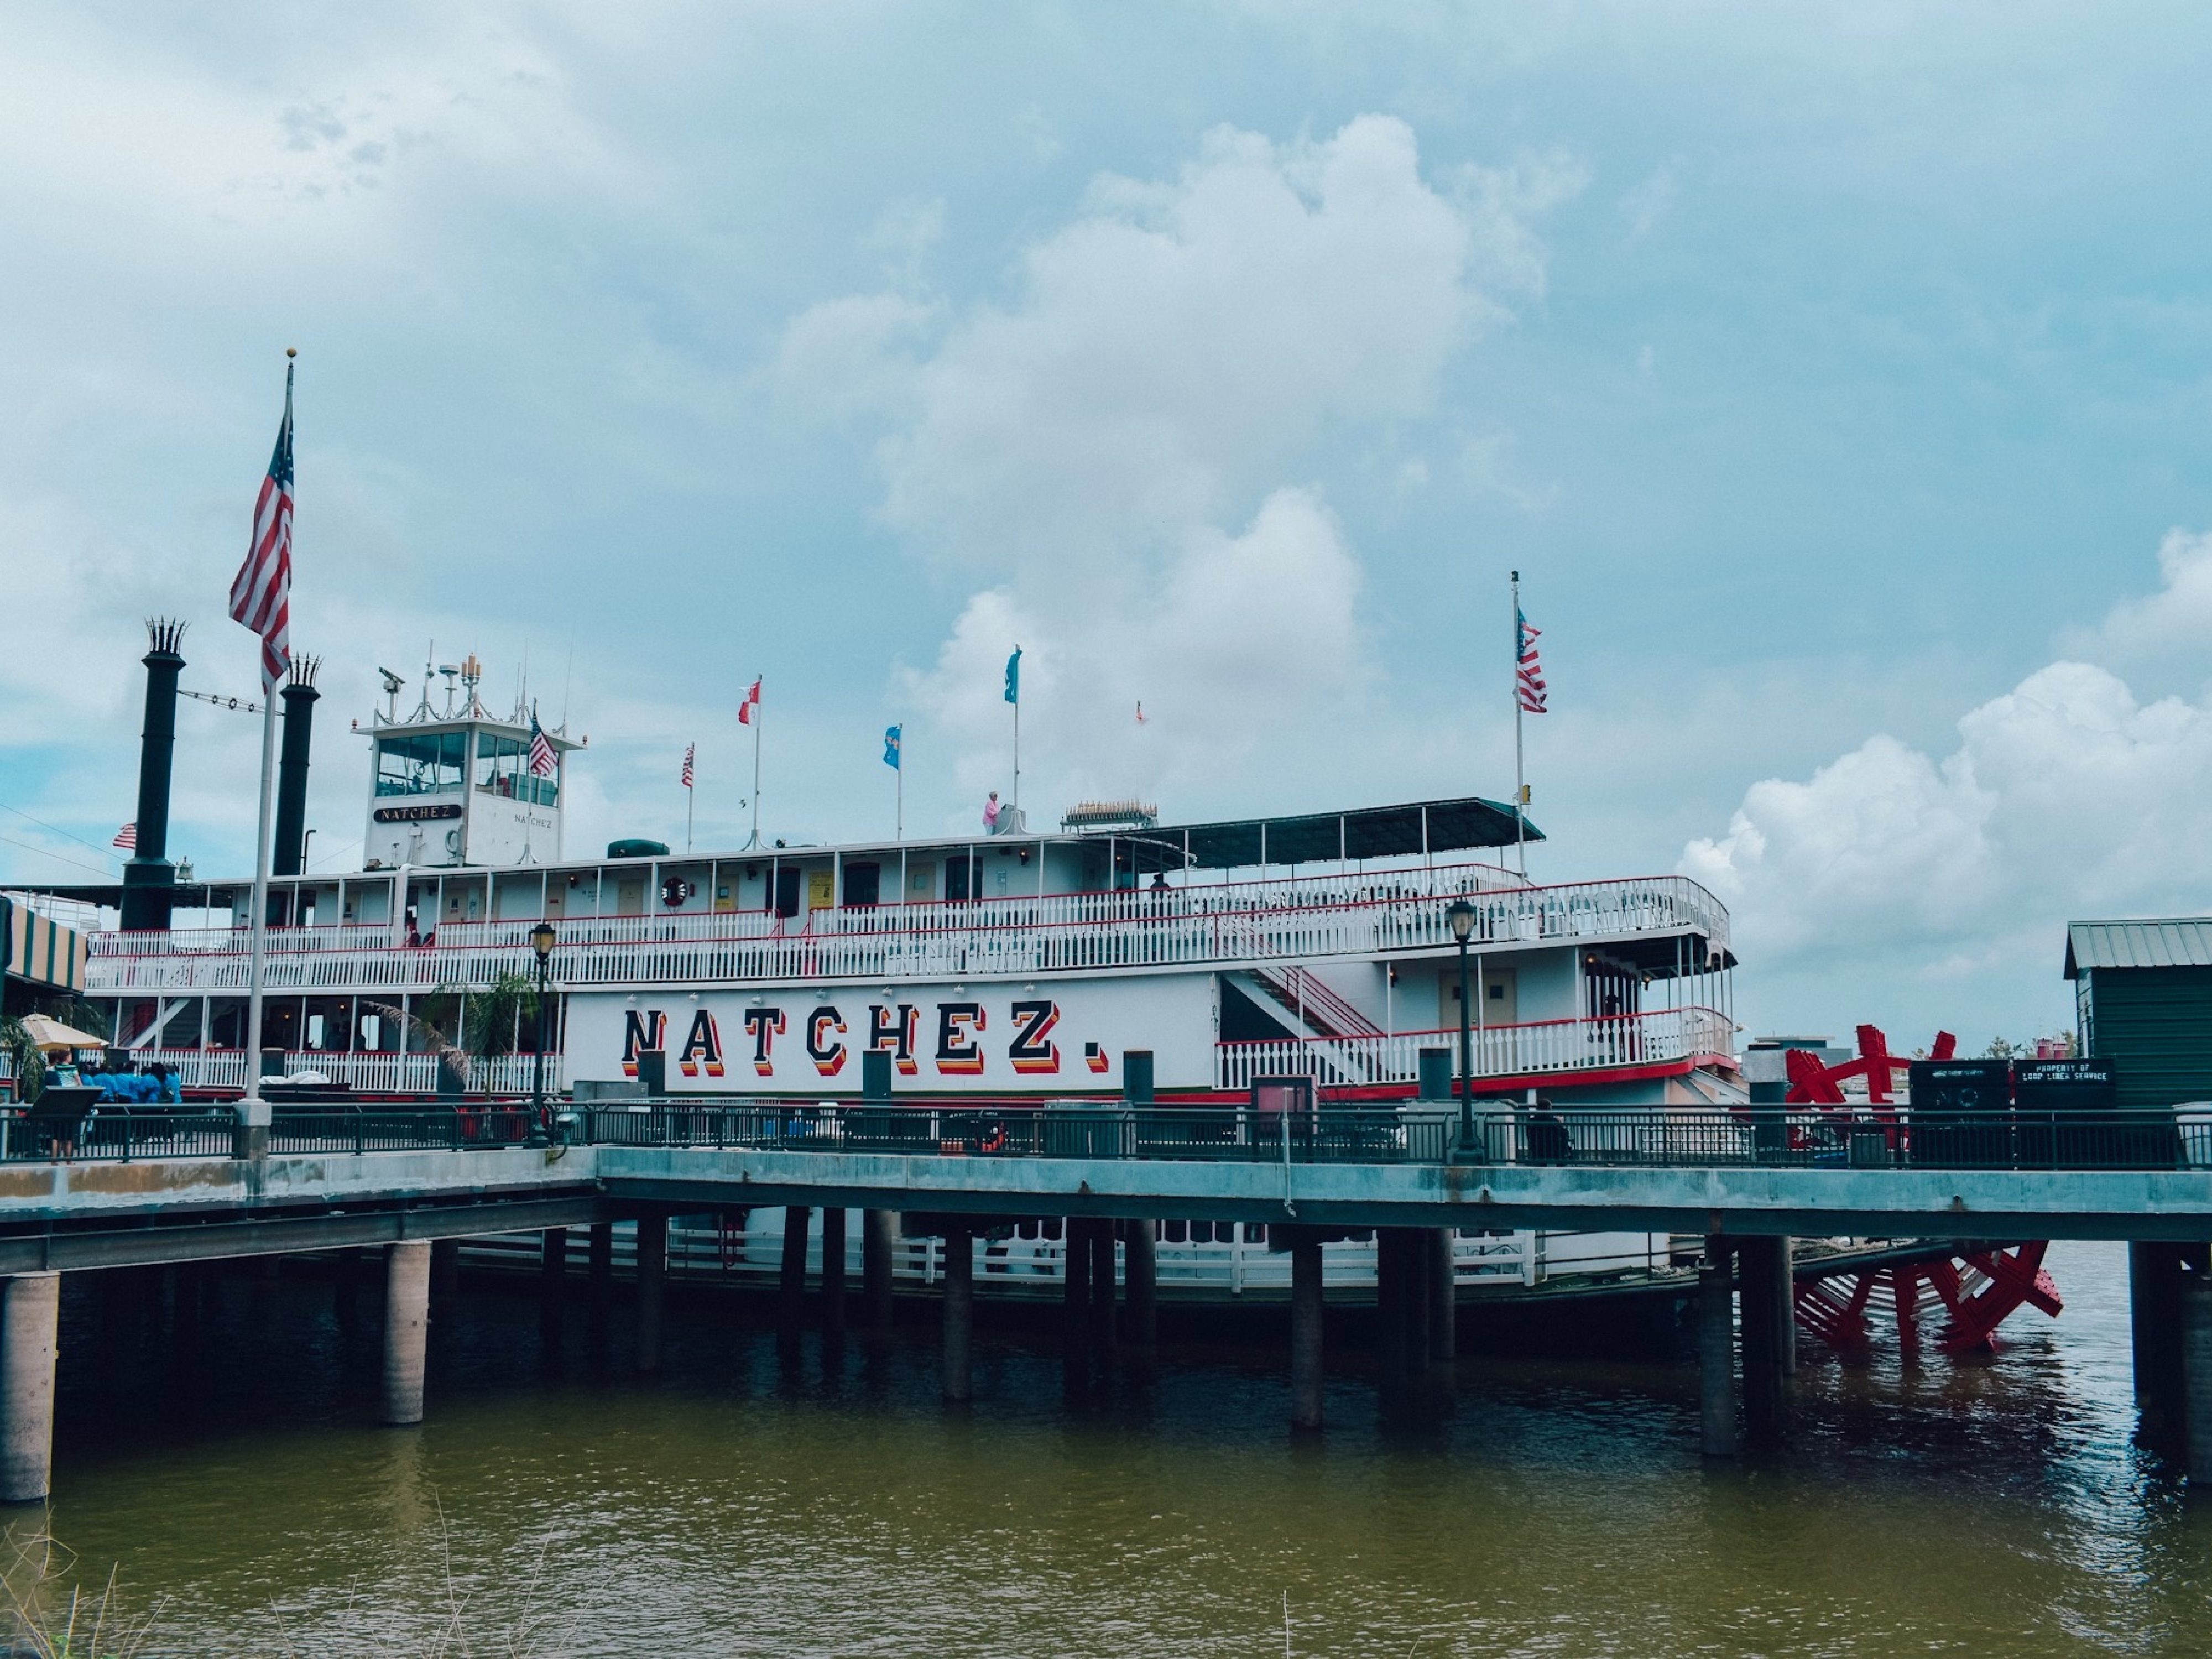 Steamboat Natchez: The perfect 3-day itinerary to New Orleans